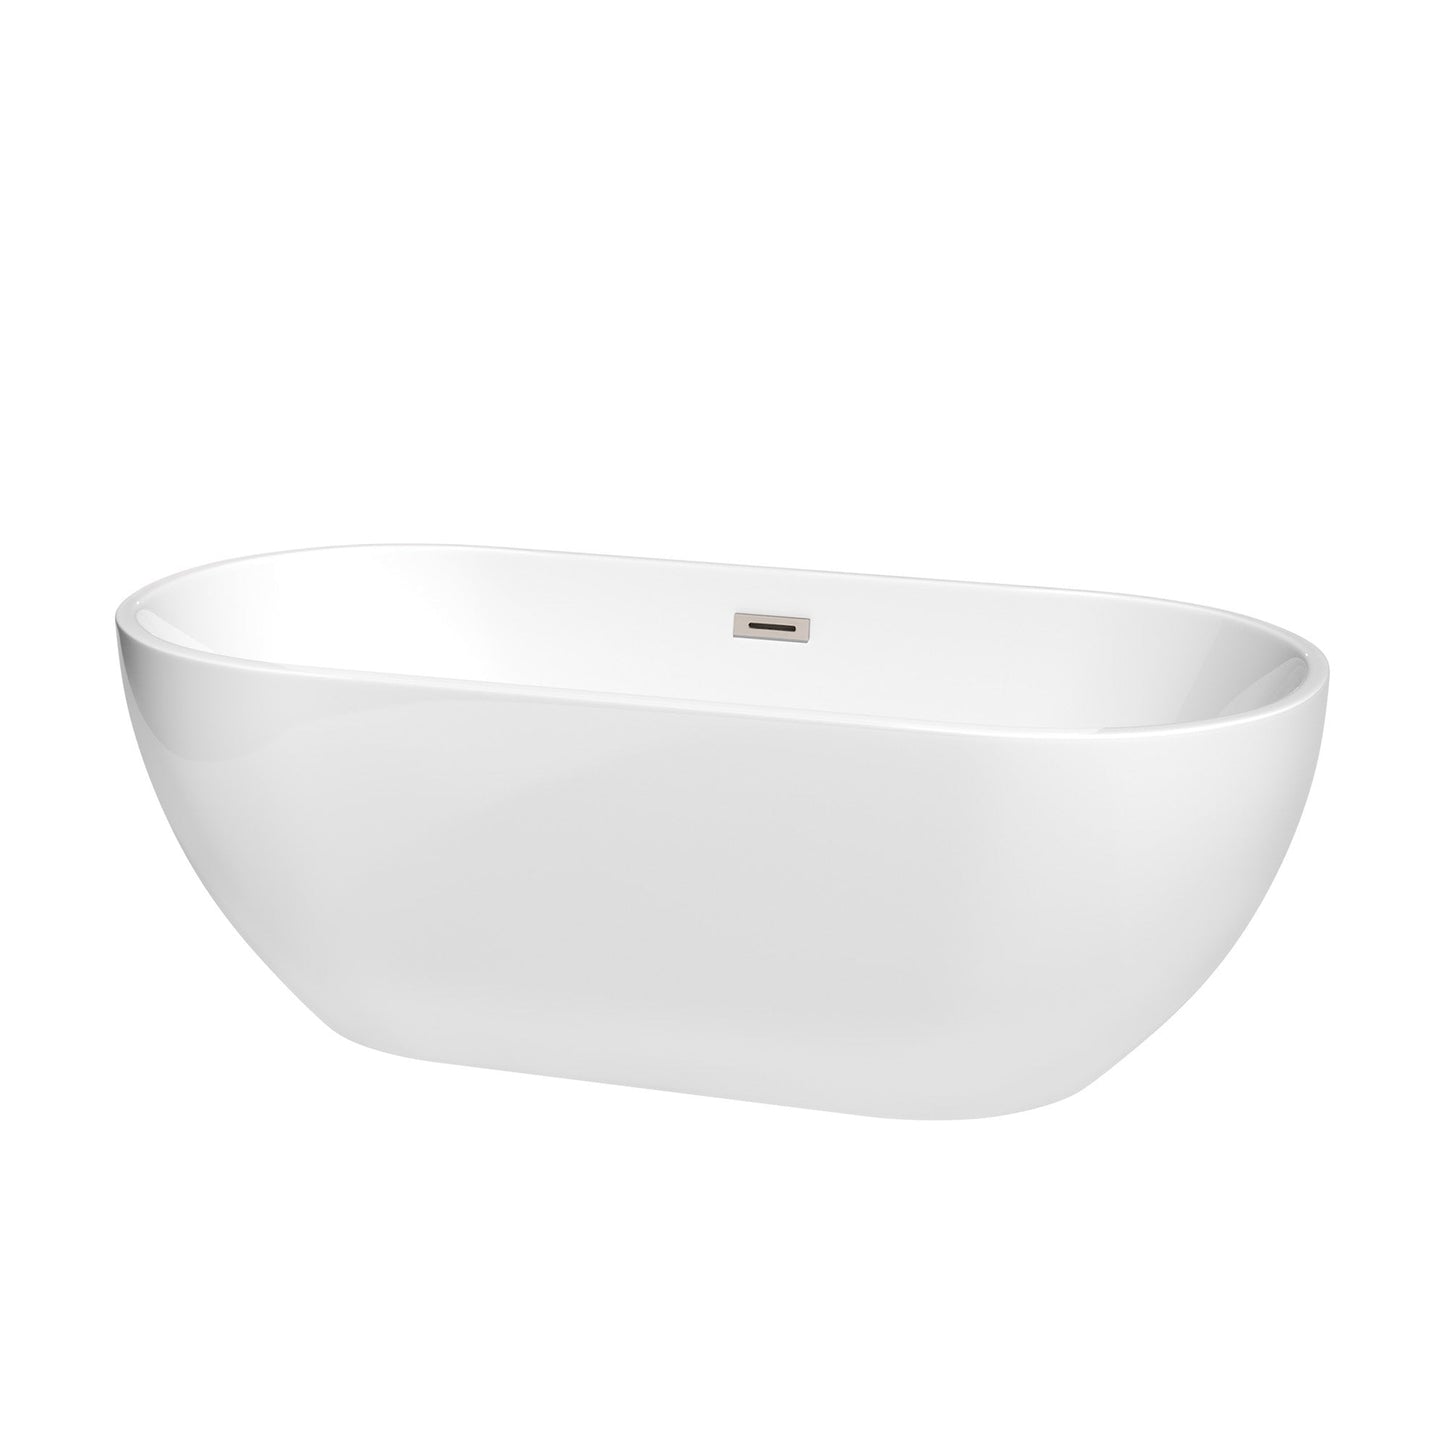 Wyndham Collection Brooklyn 67" Freestanding Bathtub in White With Brushed Nickel Drain and Overflow Trim